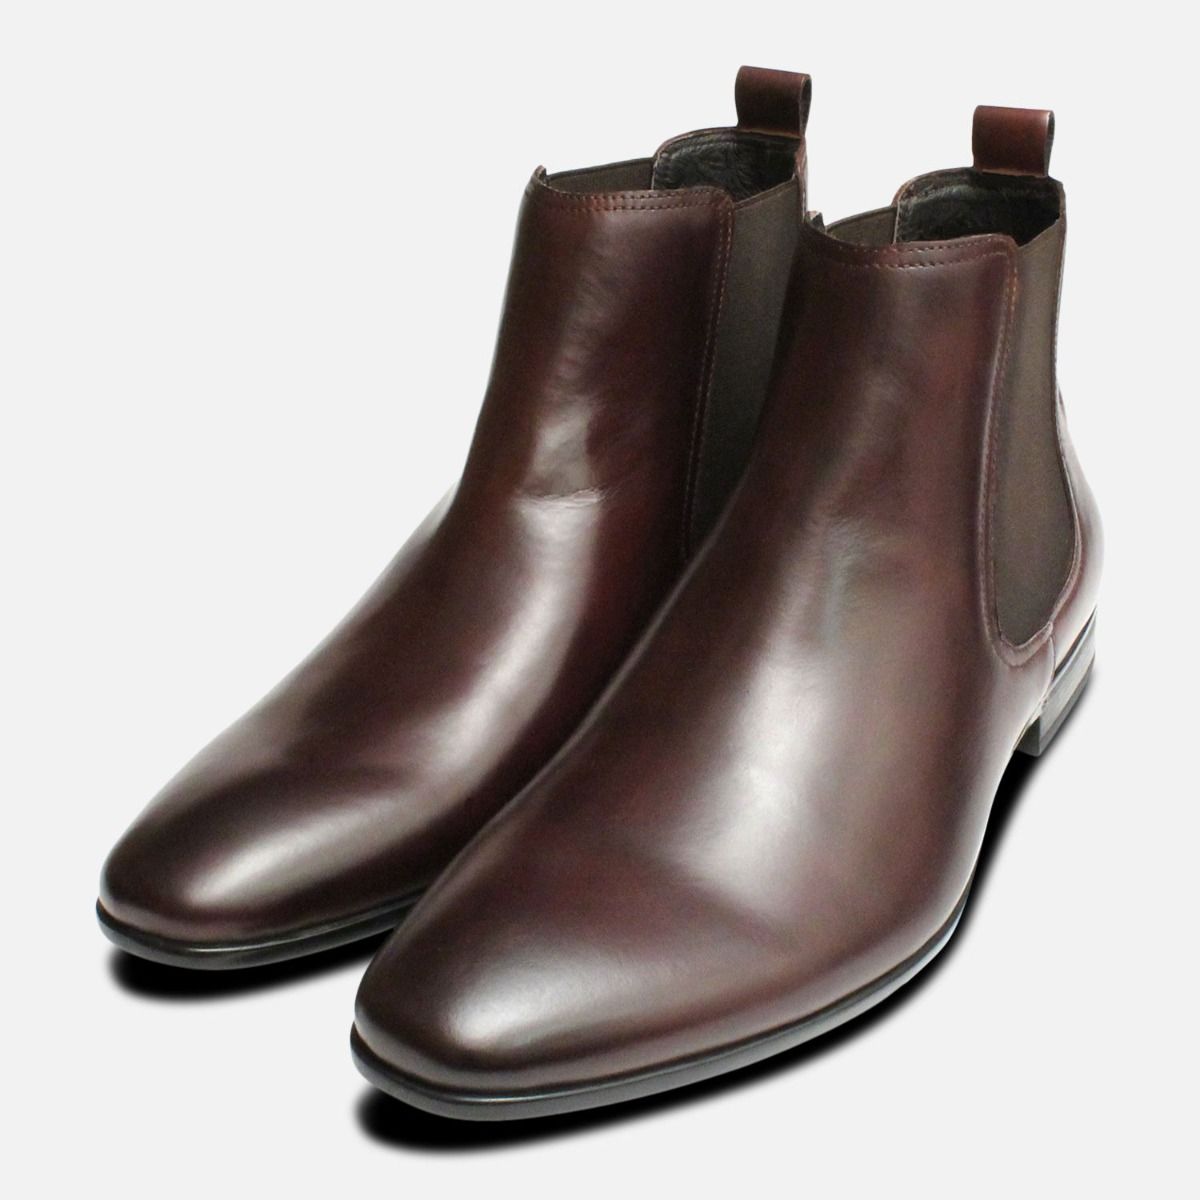 Trin bevægelse hektar John White Formal Brown Chelsea Boot with Rubber Sole